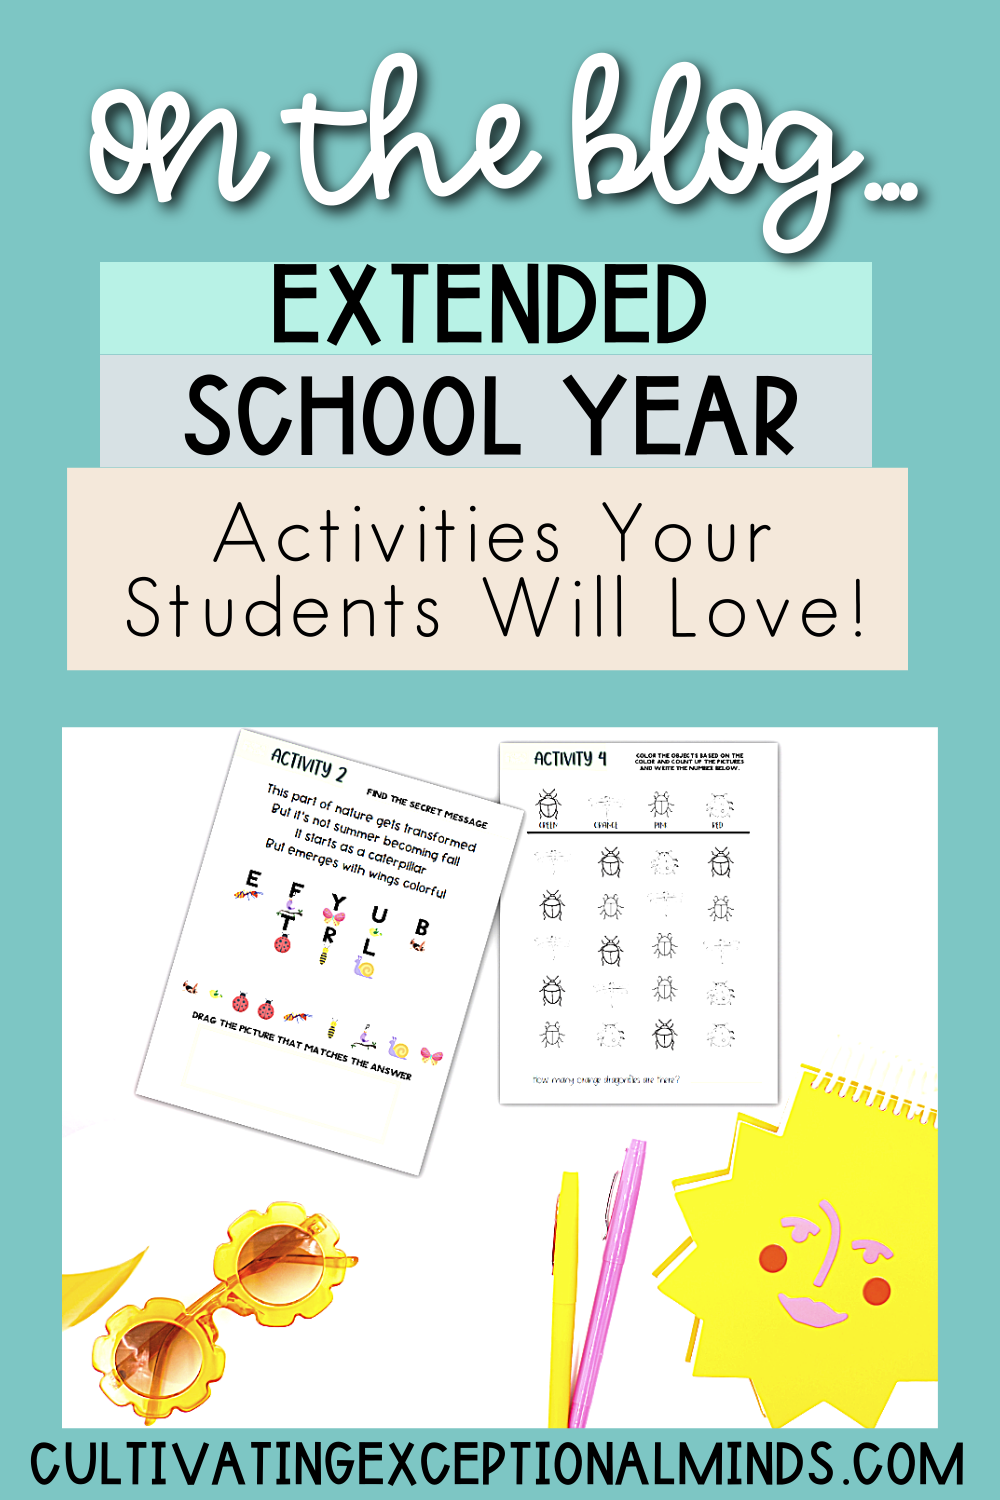 Extended School Year Activities Your Students Will Love Pin with summer themed image of worksheets